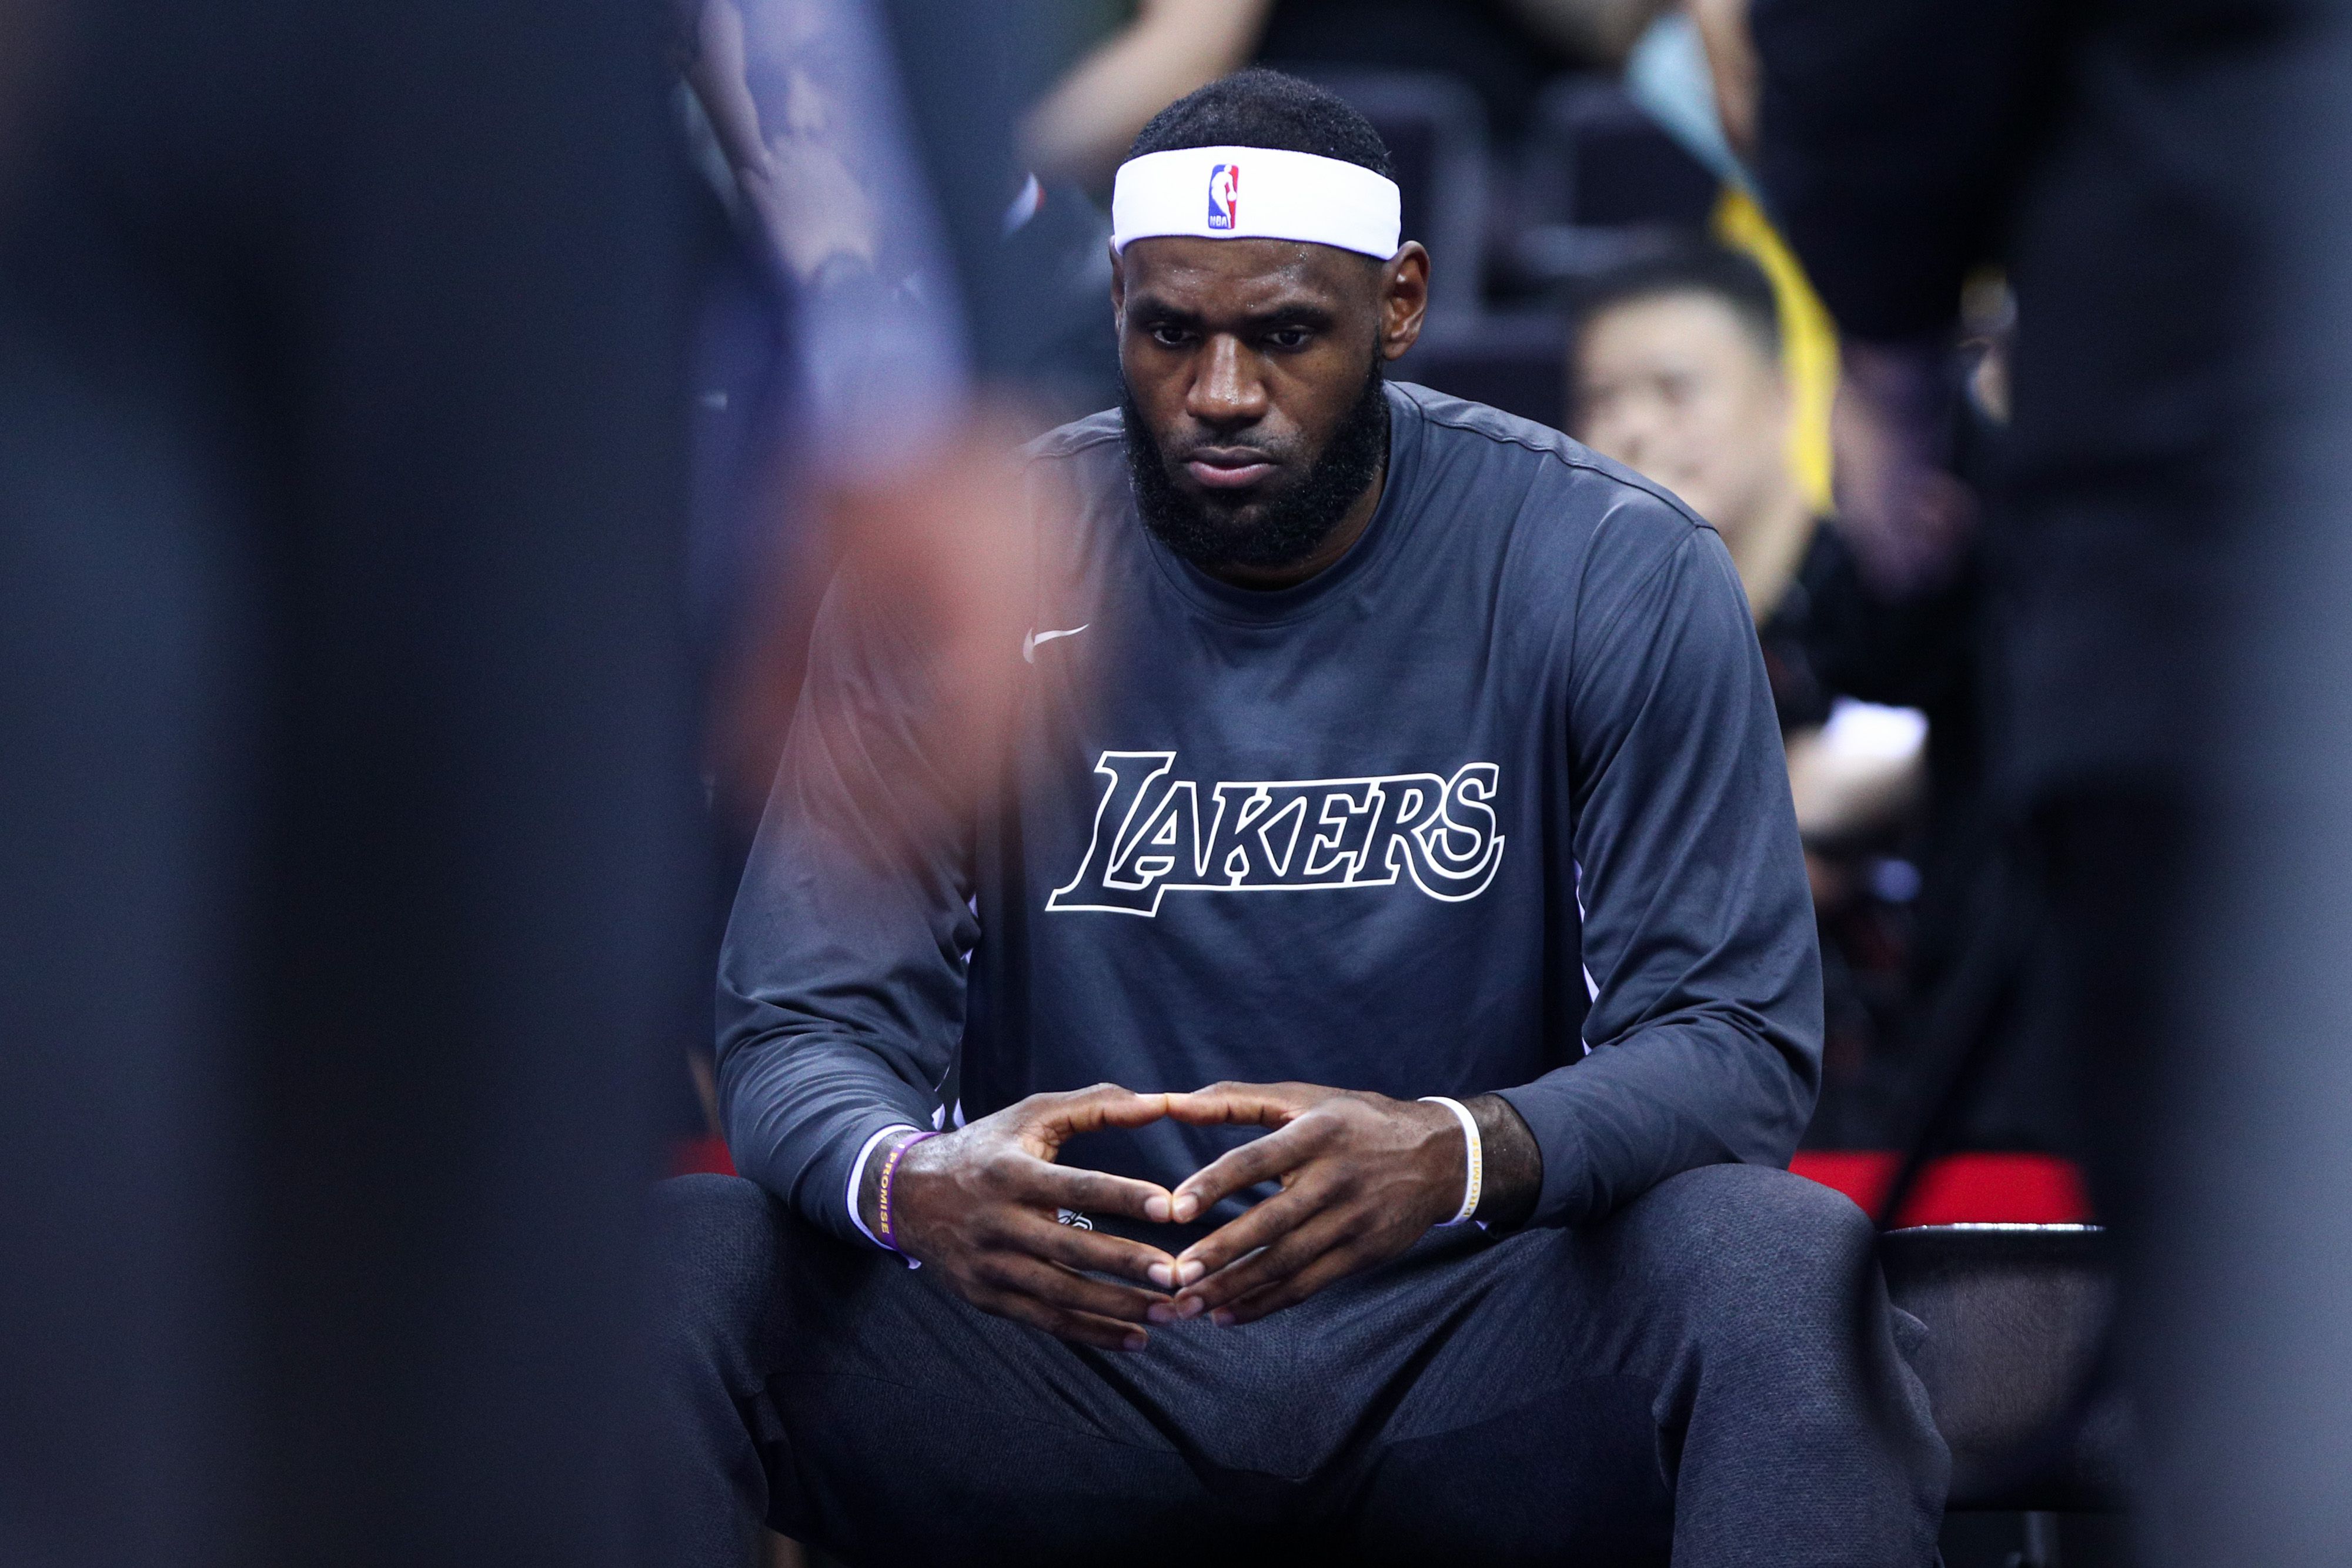 LeBron James' controversial vaccination stance: It's a mystery